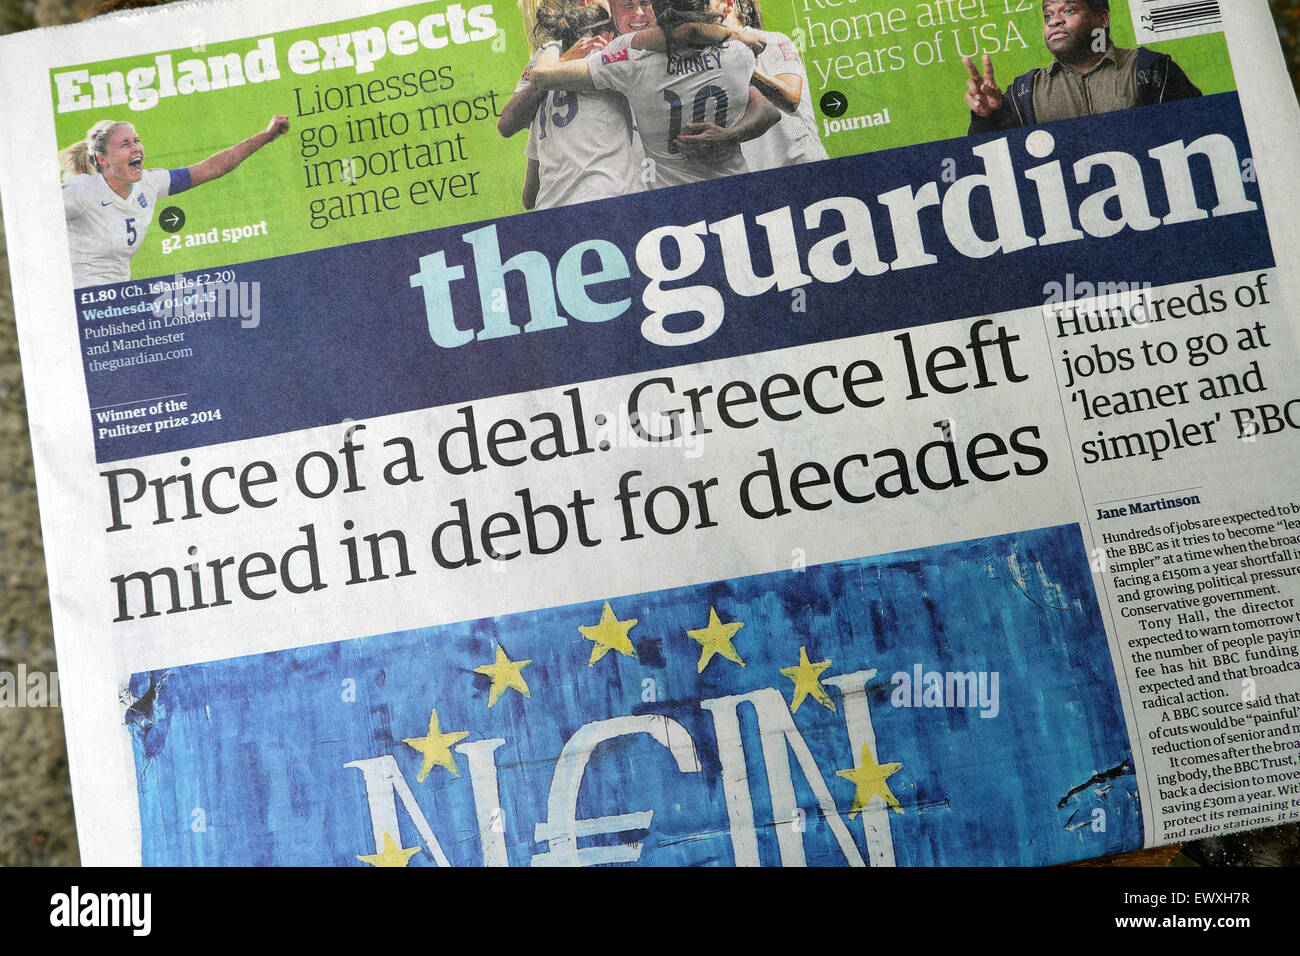 Guardian newspaper headline prior to referendum vote on 1st July 2015  'Price of a deal: Greece left mired in debt for decades'. Stock Photo